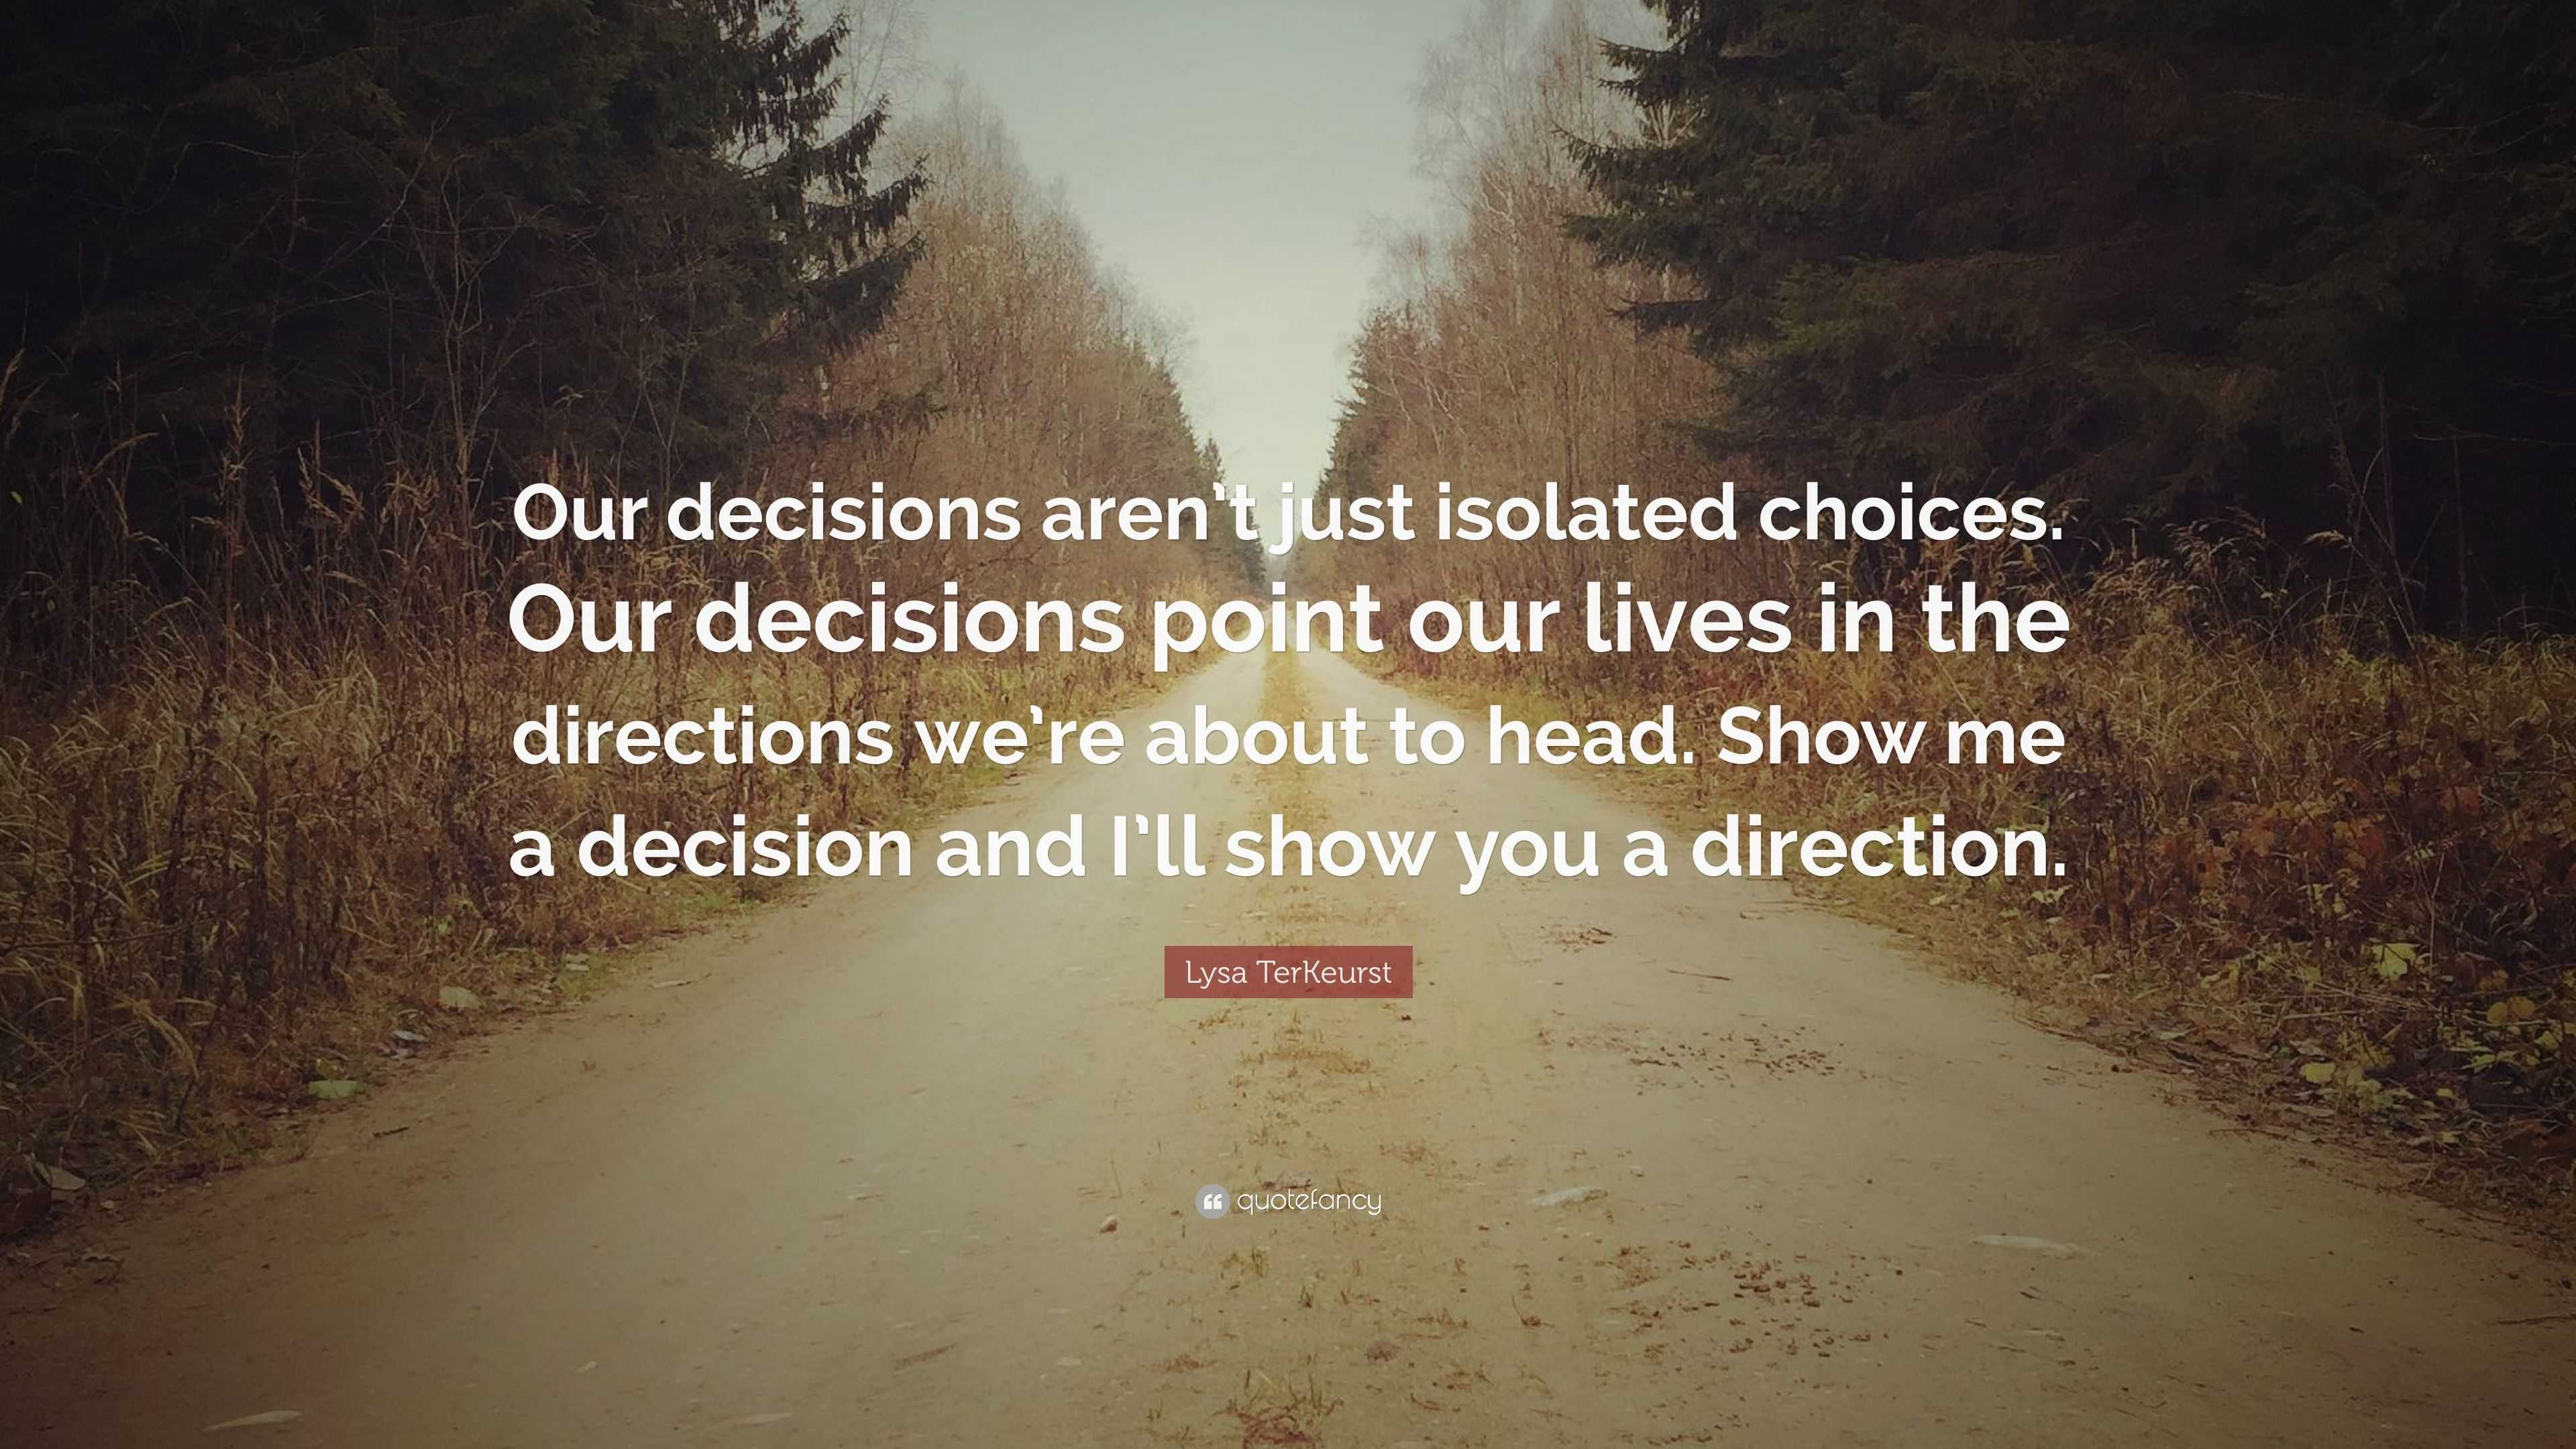 Decision meme? Here are 5 of them - Oksa - Your decisions have affect